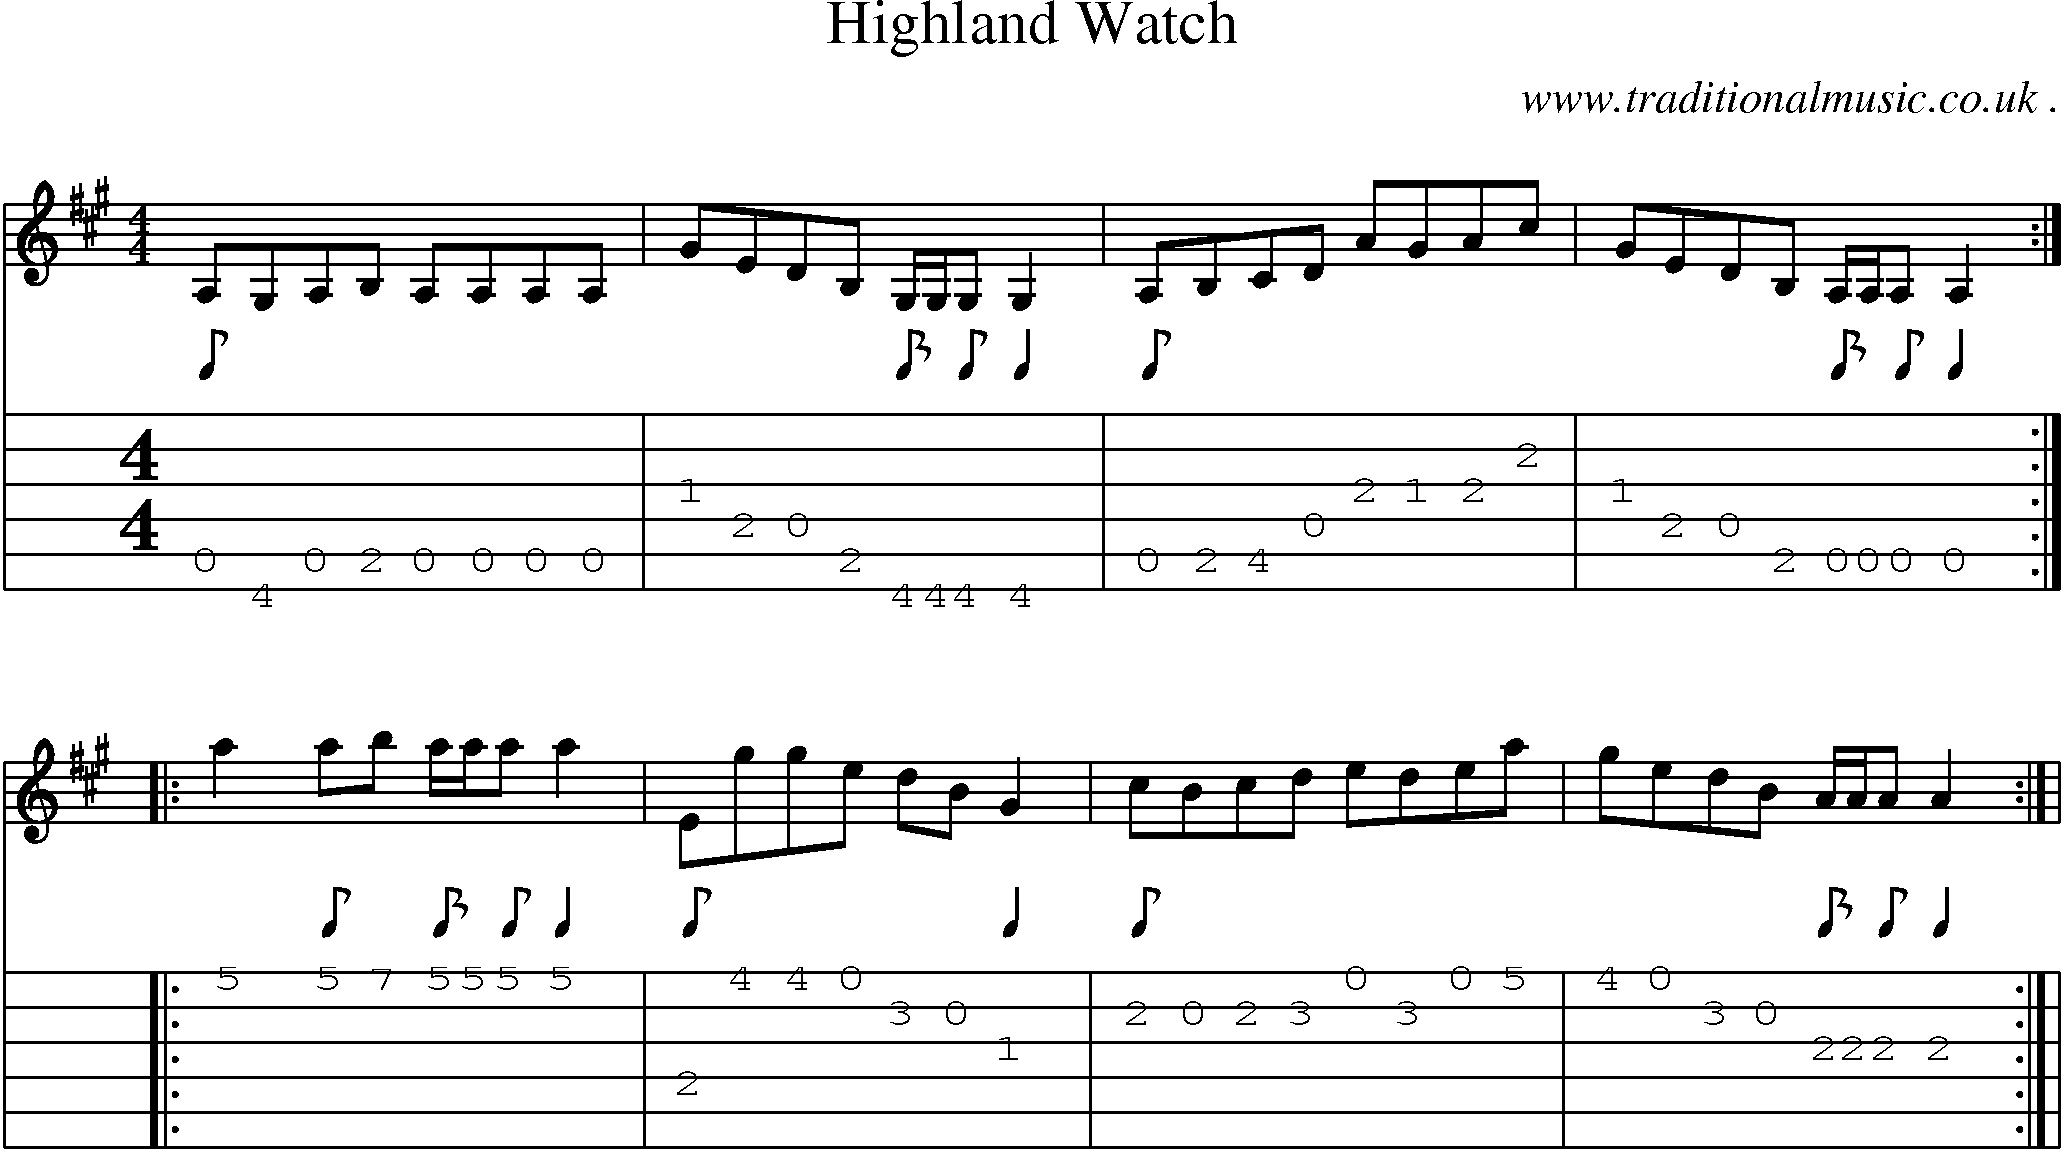 Sheet-Music and Guitar Tabs for Highland Watch